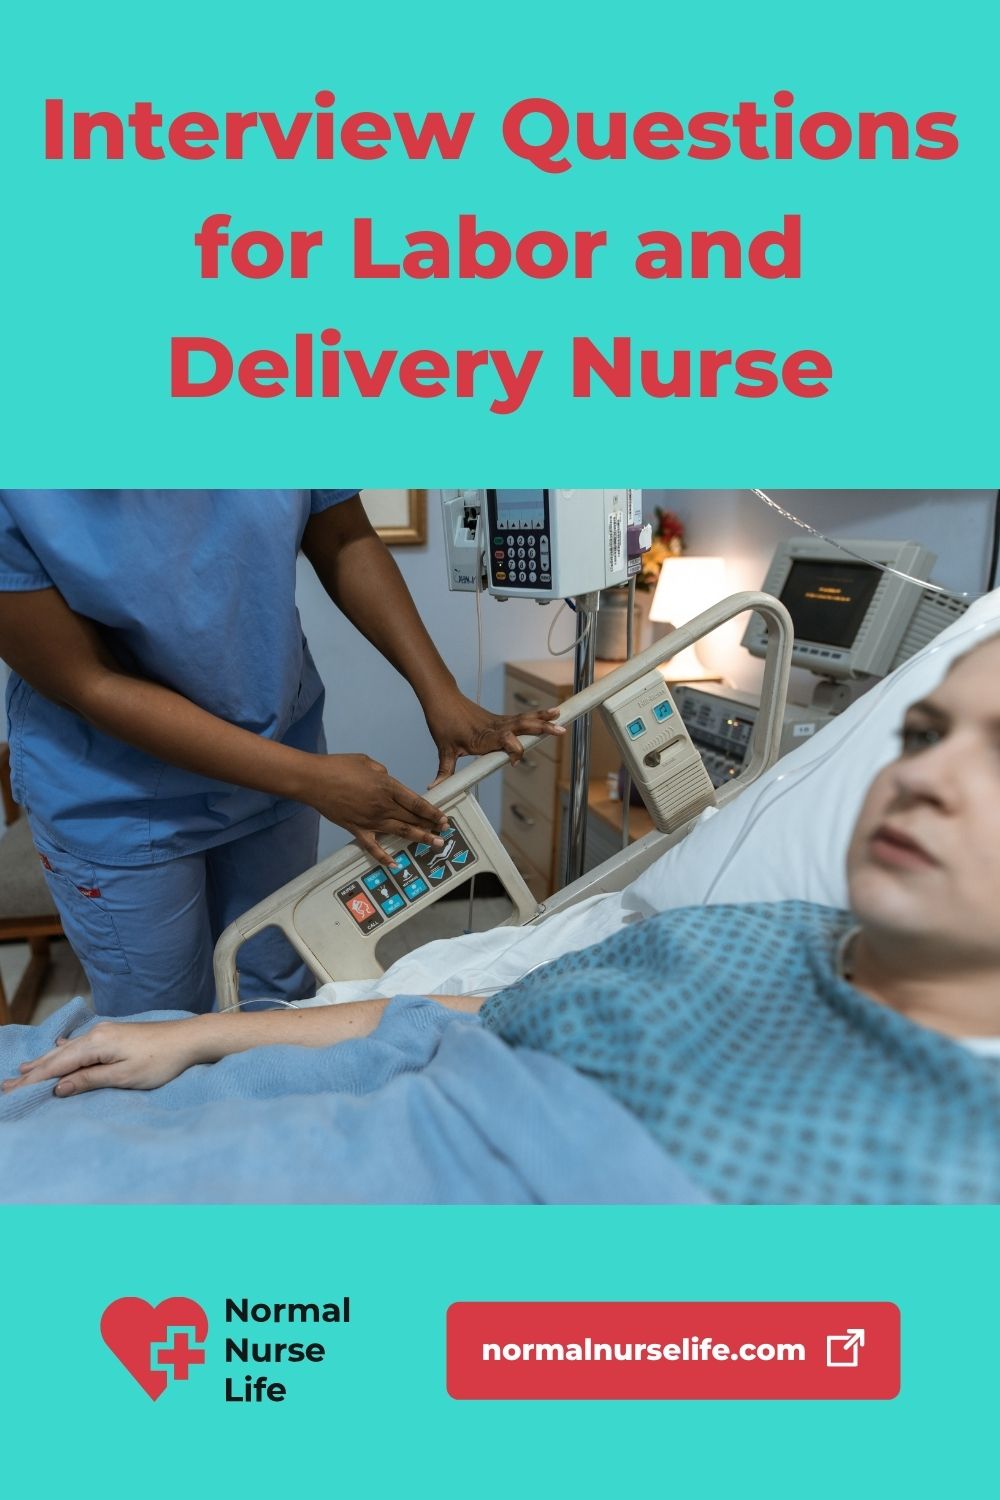 Labor and delivery nurse interview questions and answers